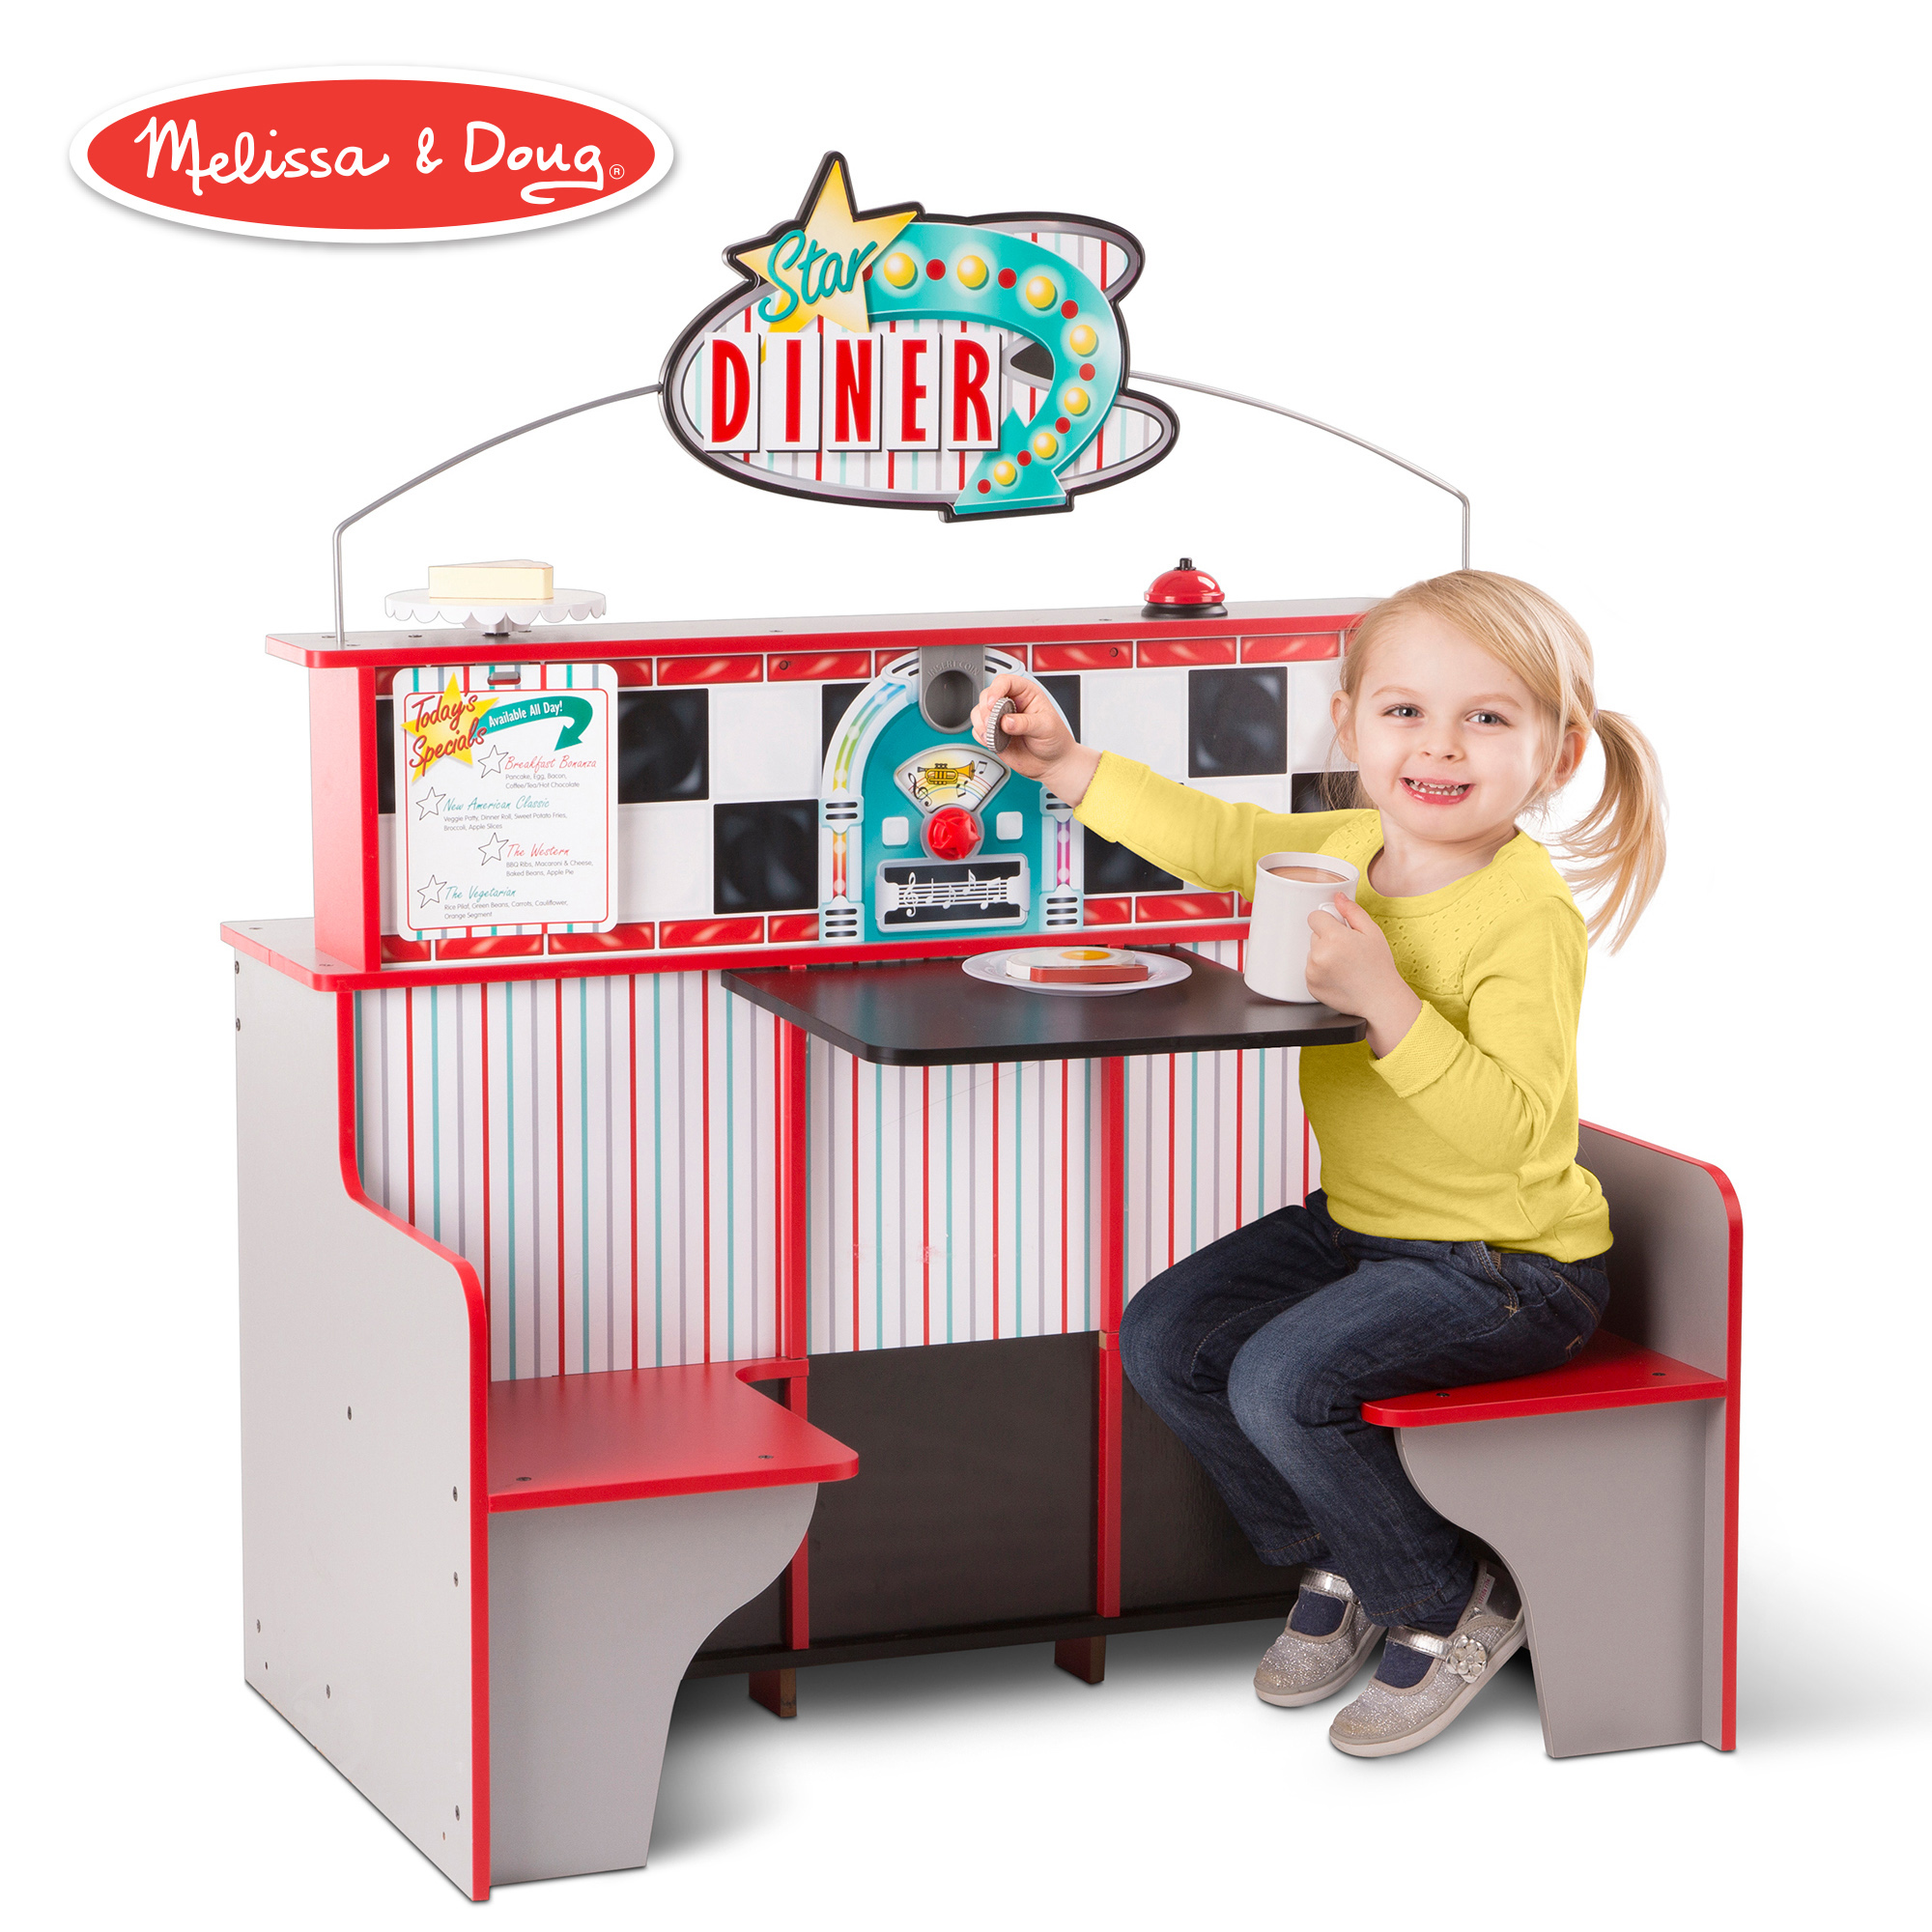 Star Diner Restaurant, Play Set & Kitchen, Wooden Diner Play Set, Two Play Spaces In One